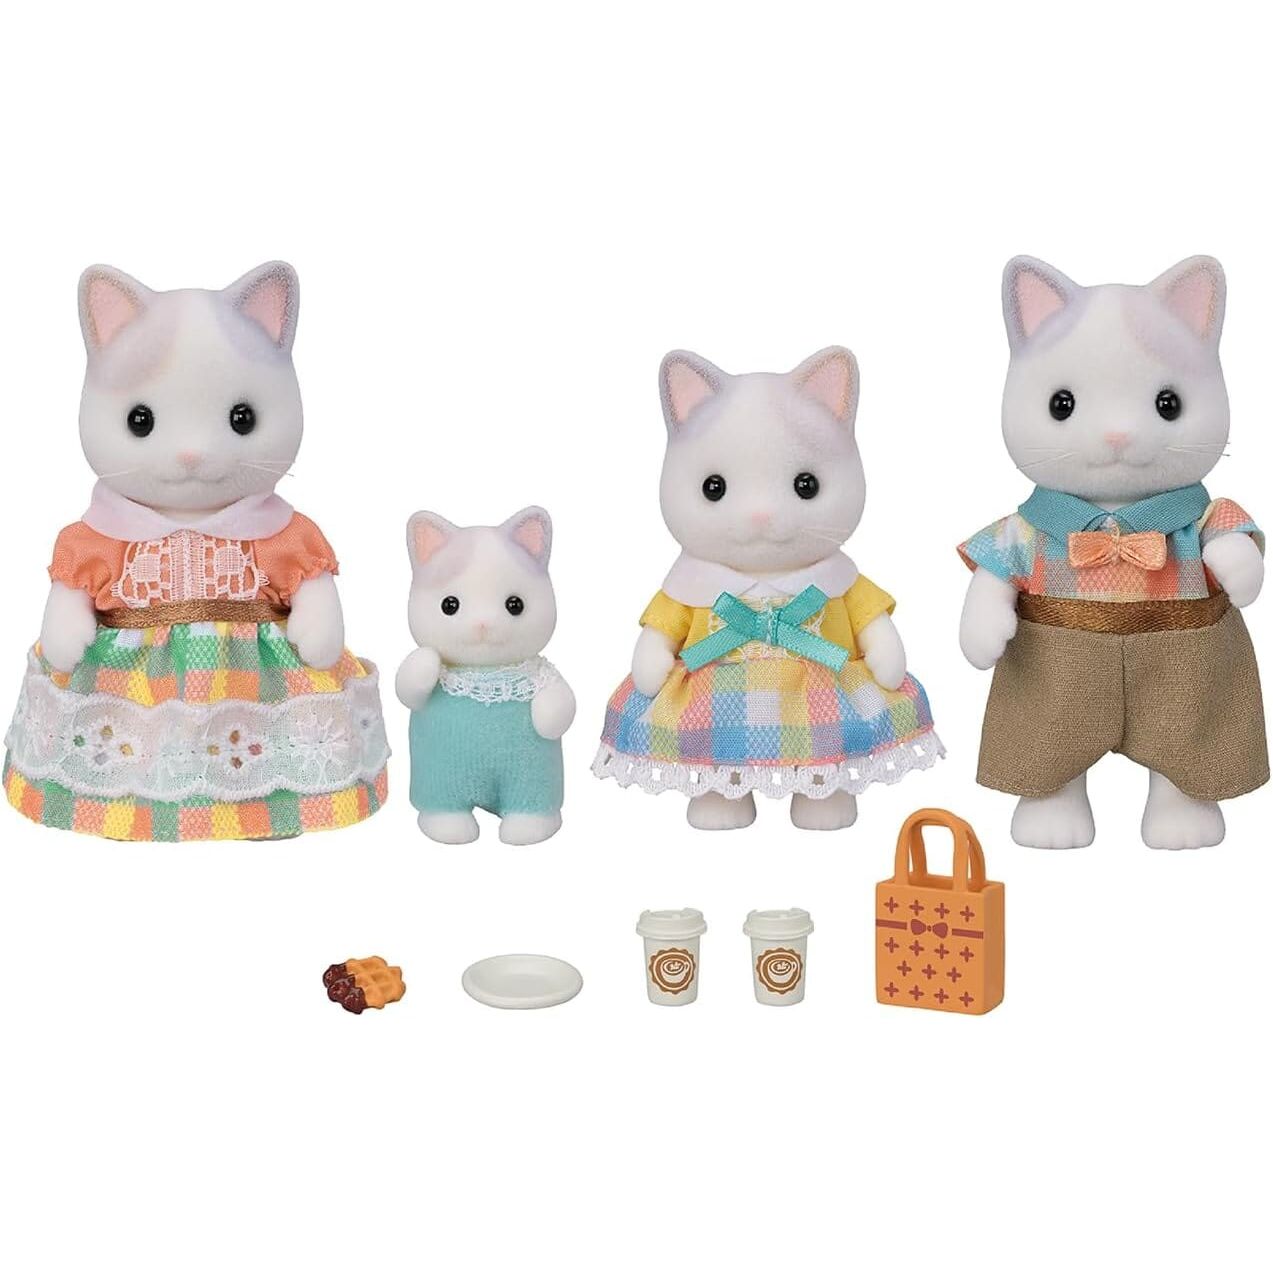 Latte Cat Family by Calico Critters